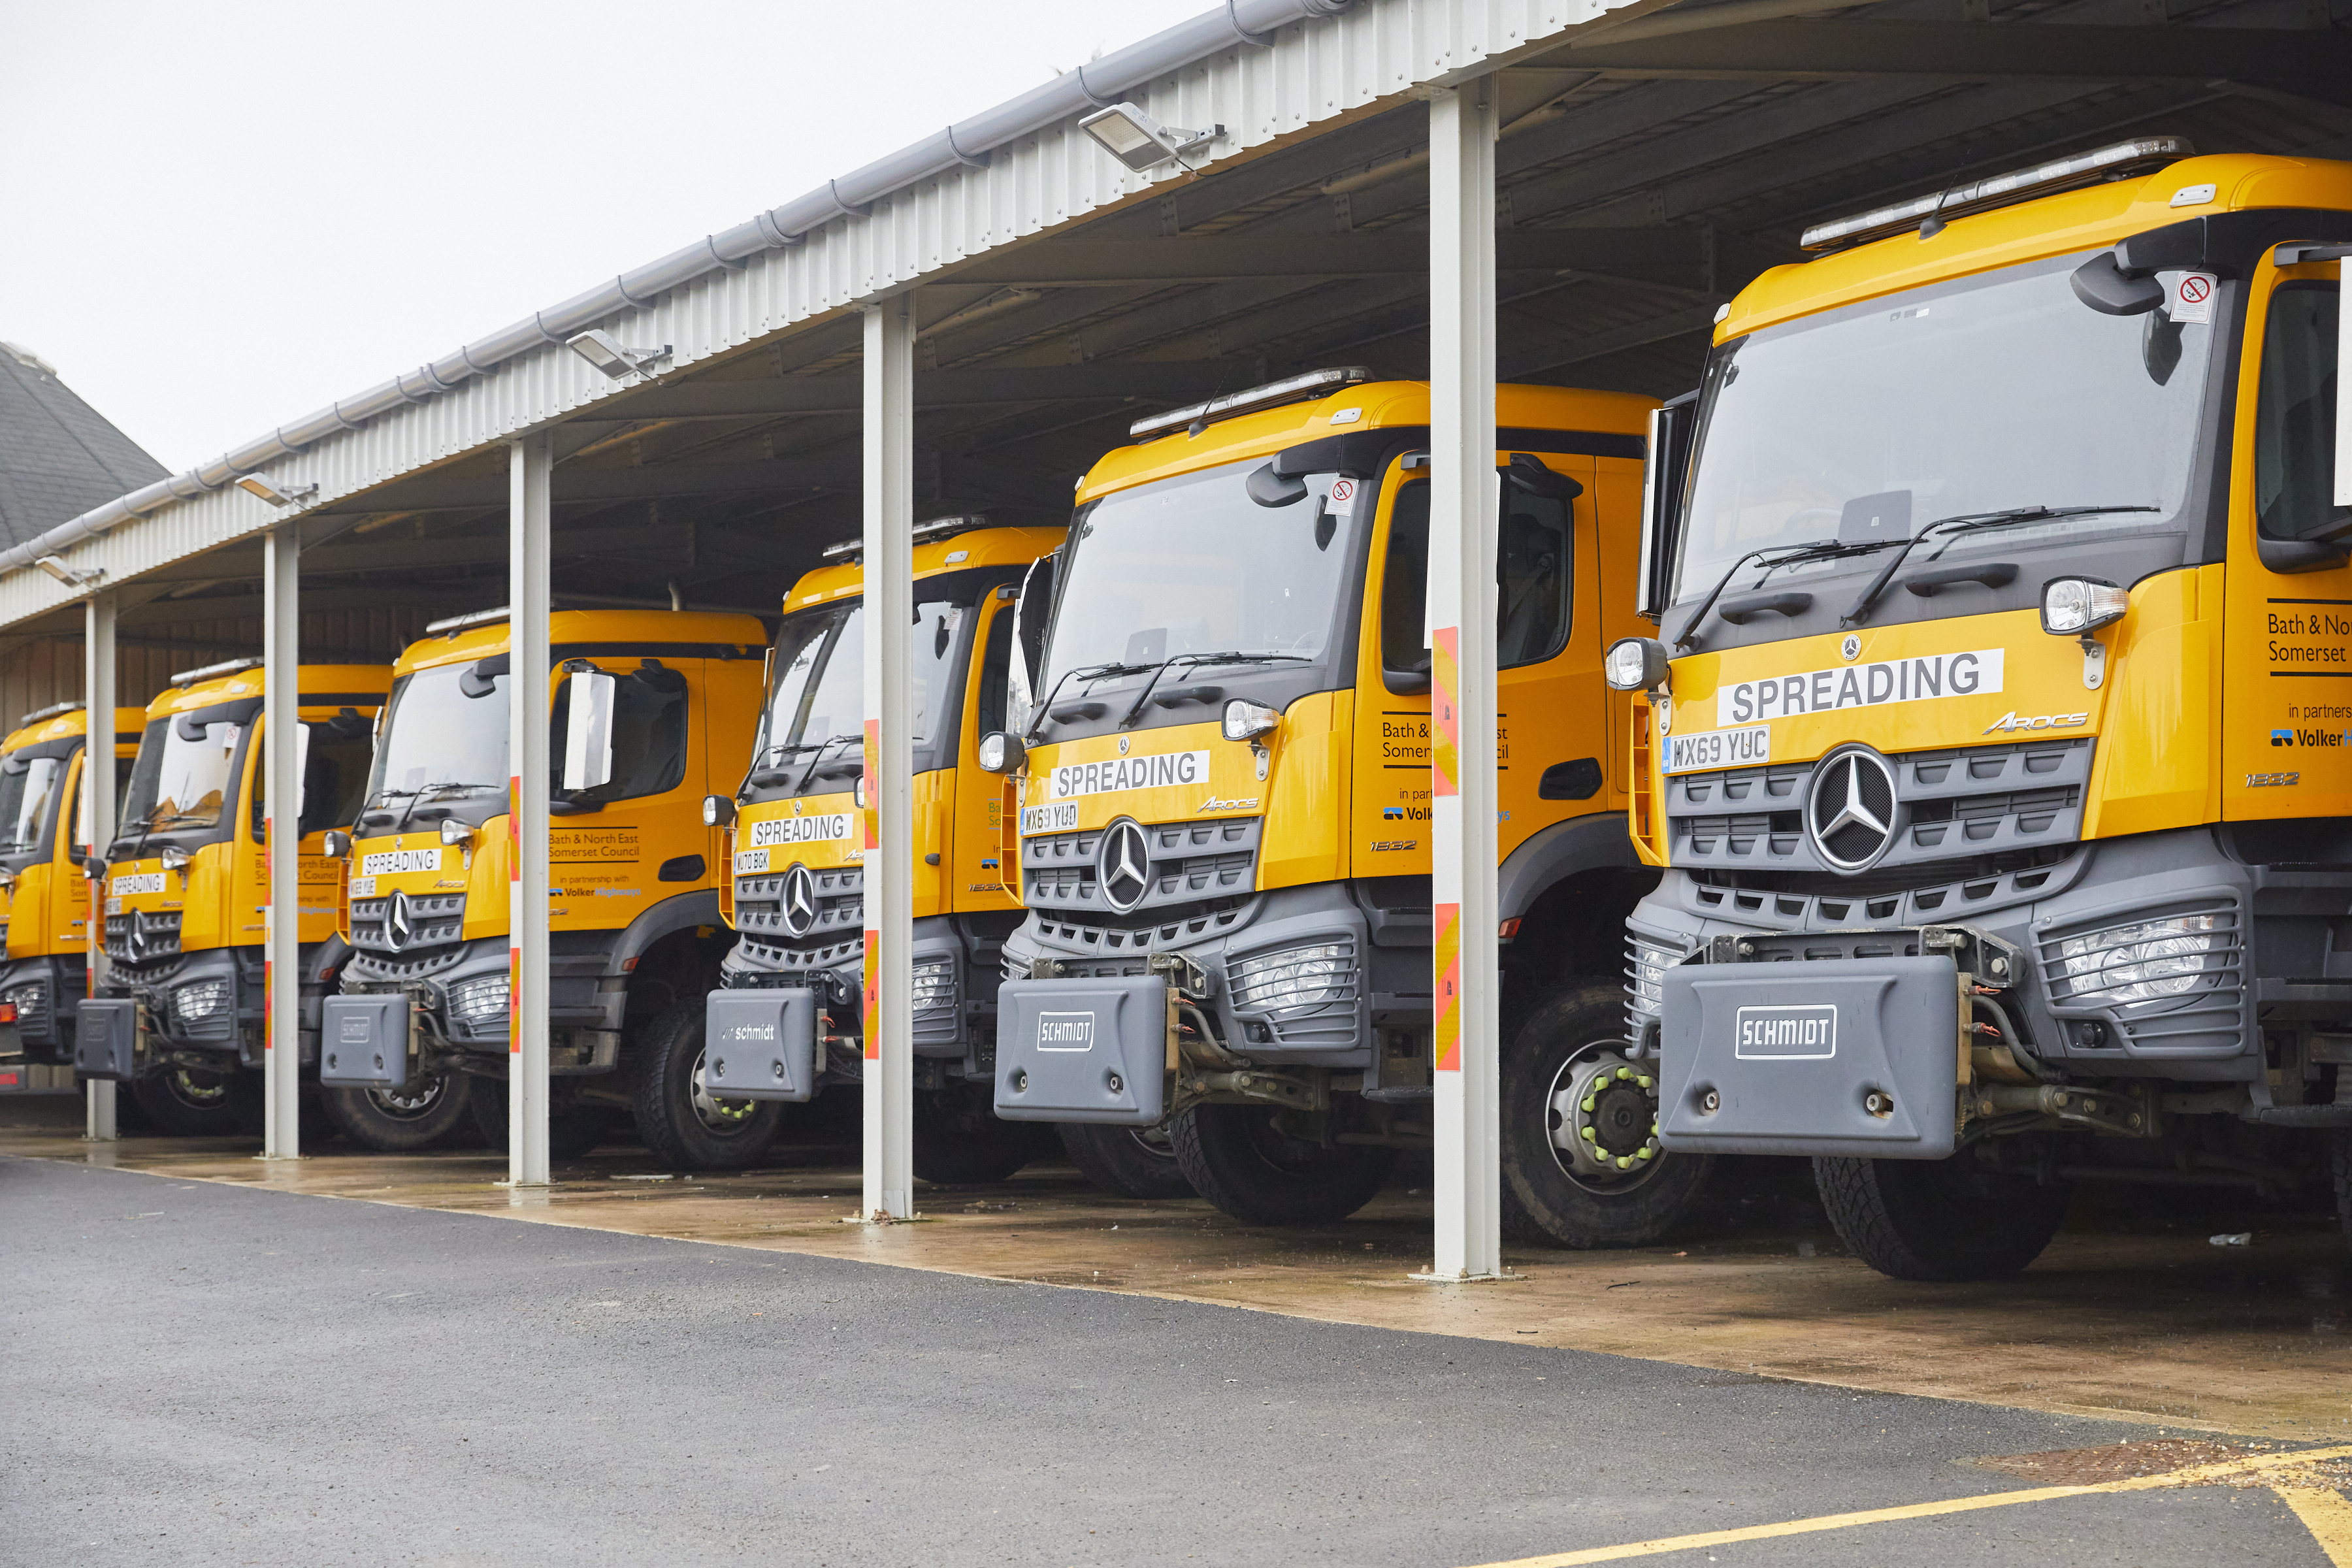 Gritting vehicles used by the council